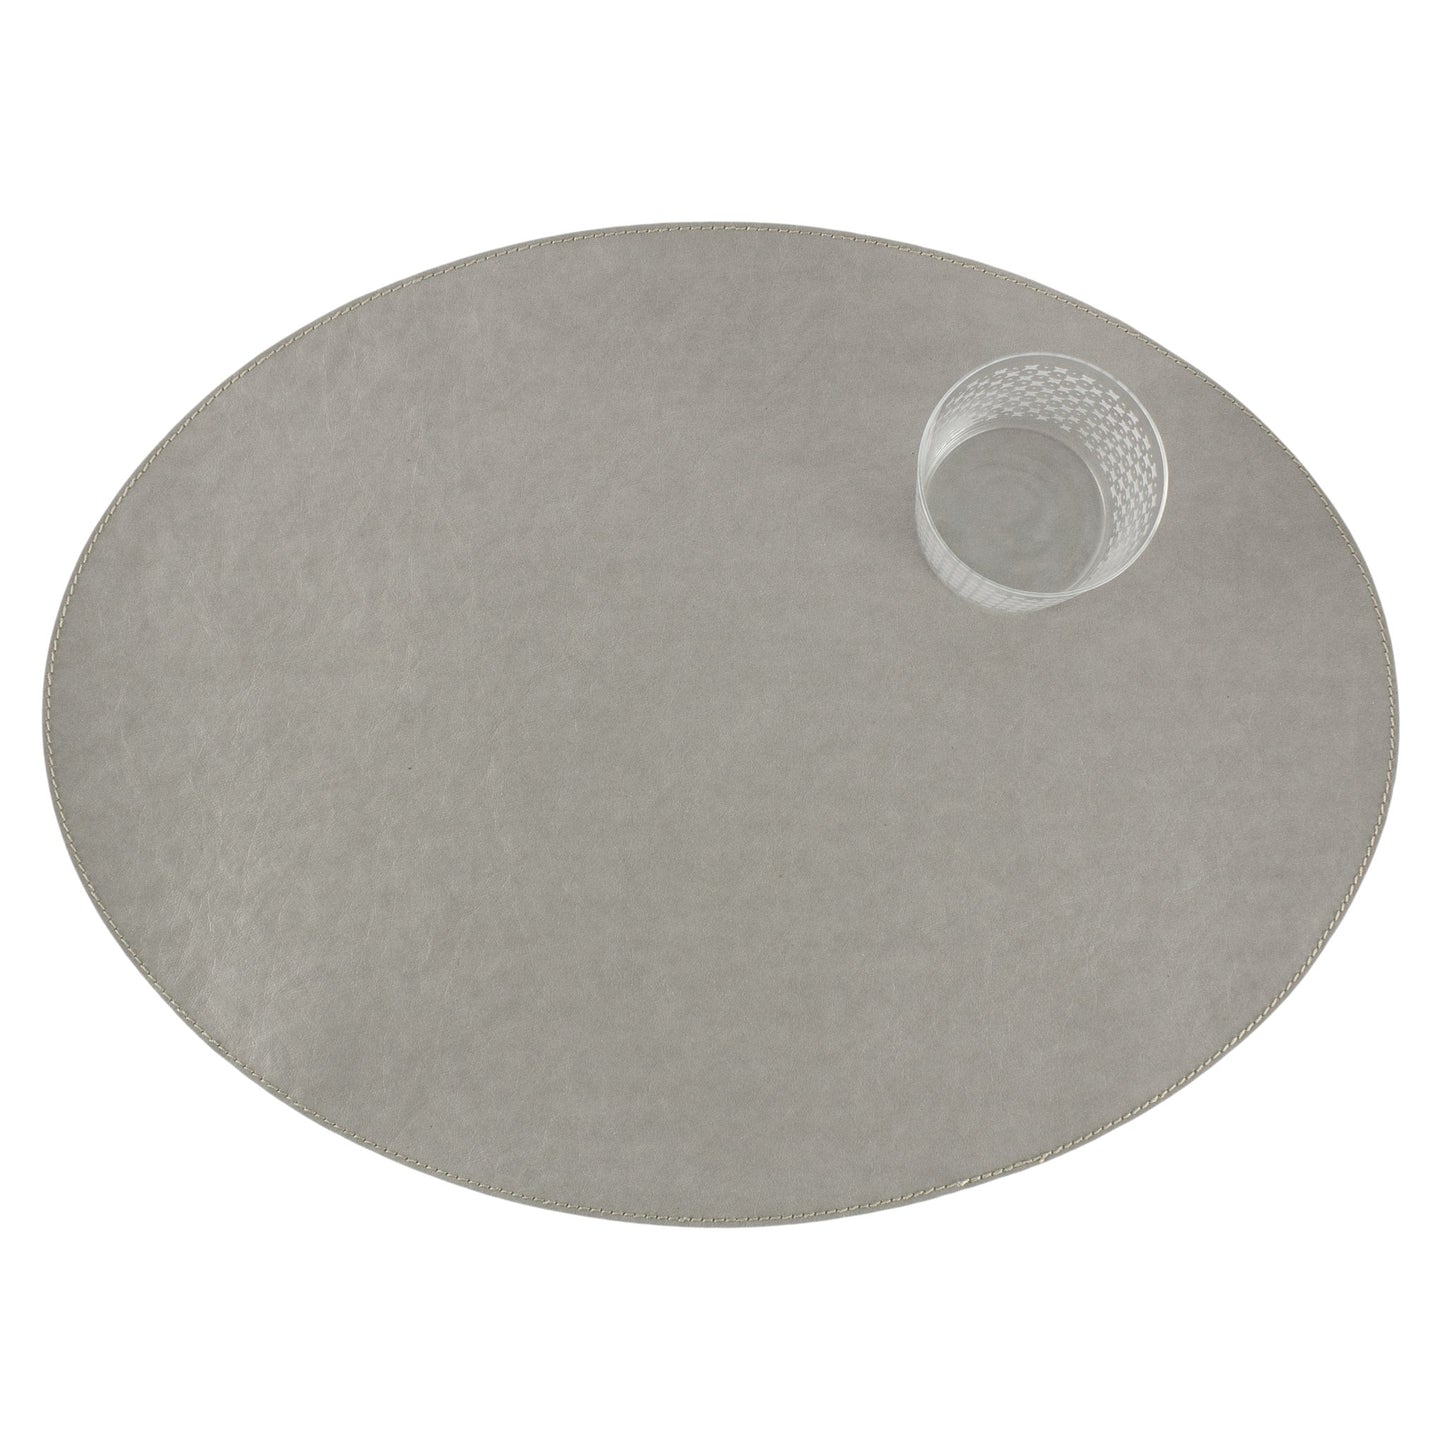 An oval washable paper placemats is shown with a small drinking glass in the upper right hand corner. The placemat shown is pale grey.